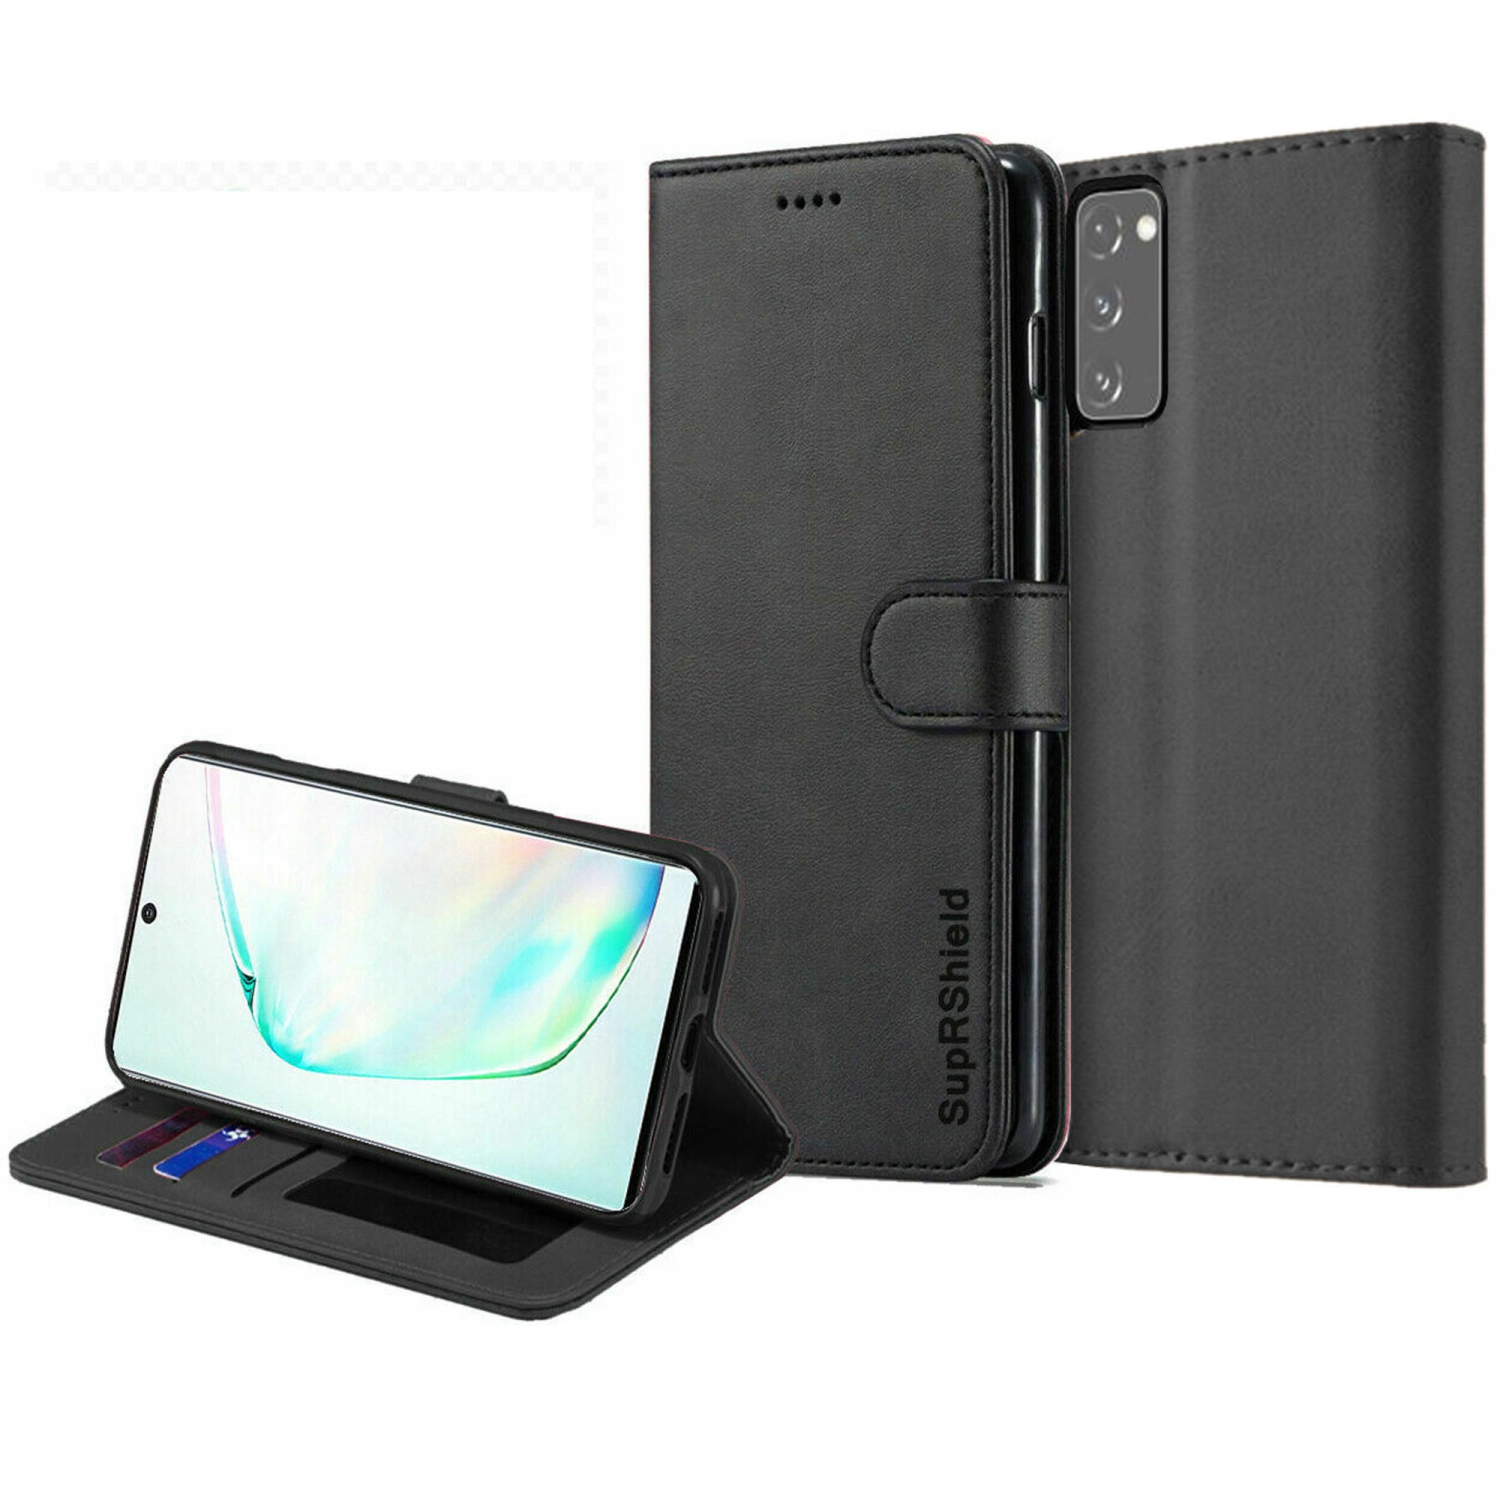 Samsung Galaxy S10 Plus Black SupRShield Wallet Leather Card Holder Flip Protective Shockproof Magnetic Case Cover